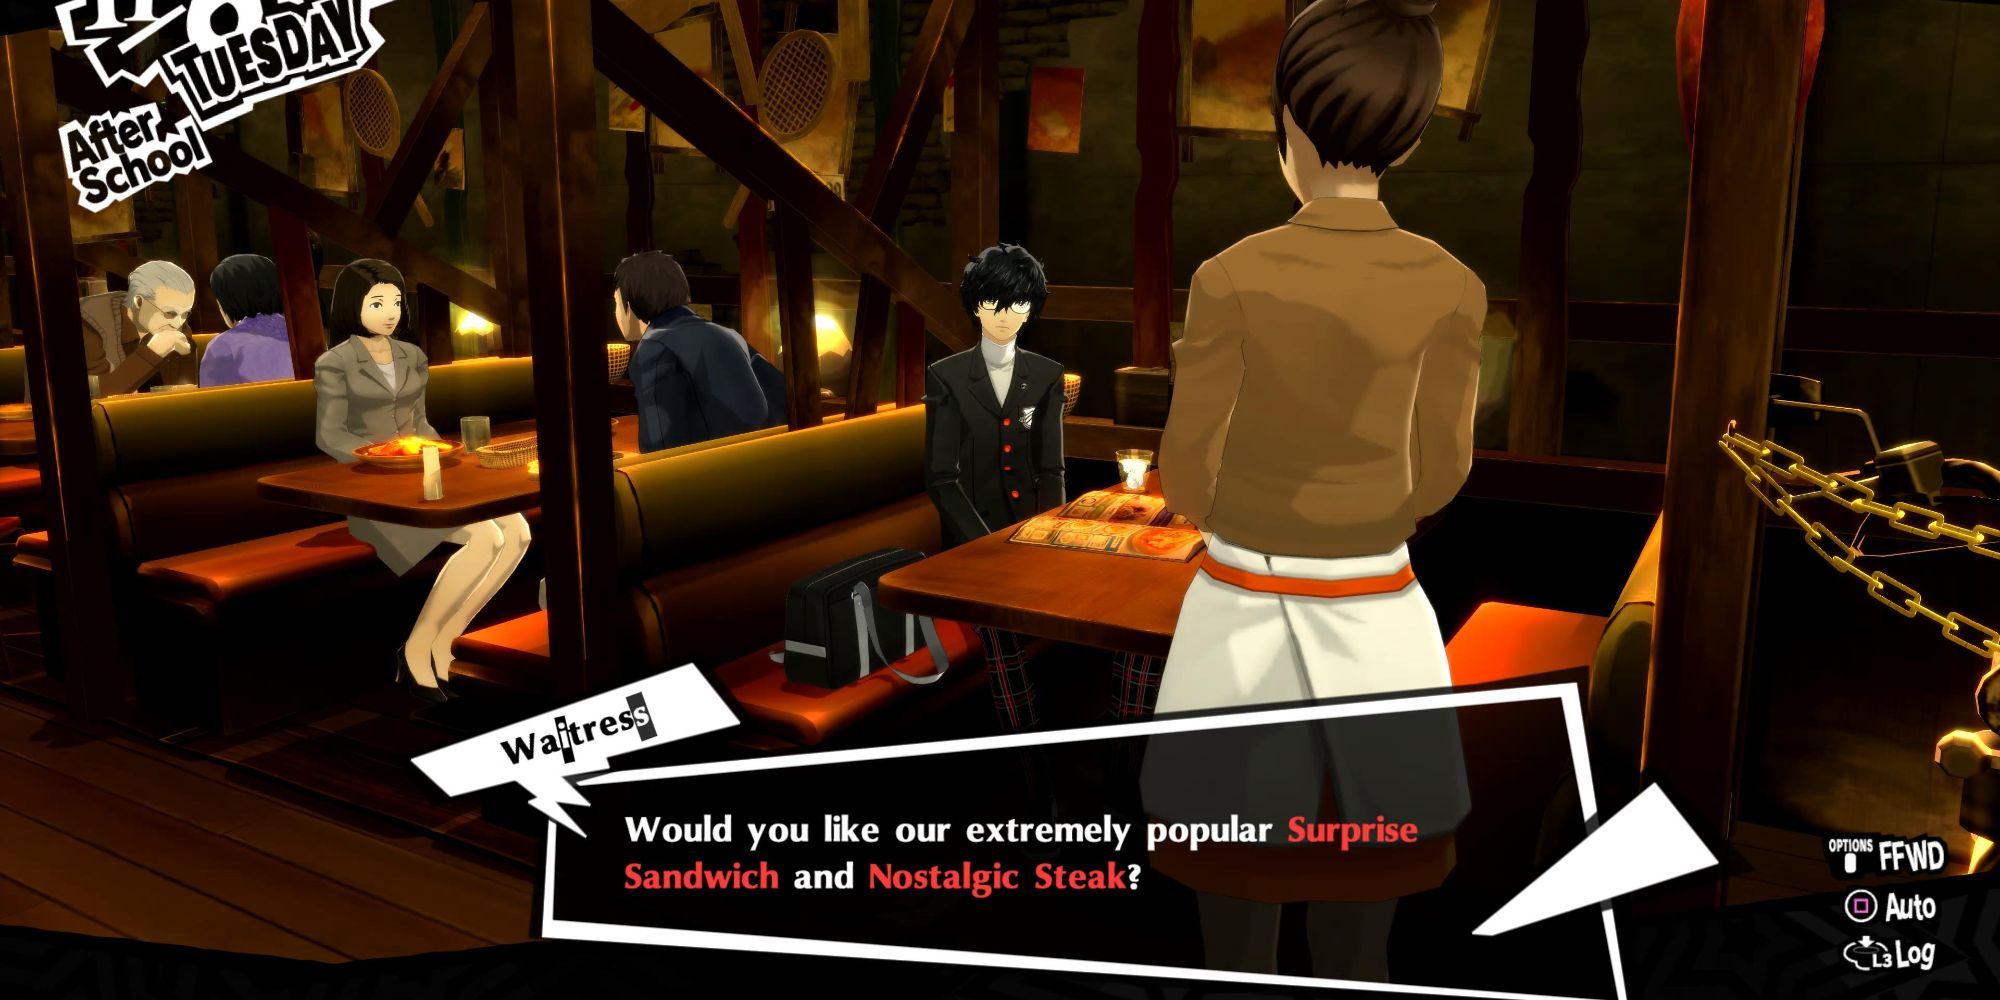 Persona 5 Royal - the protagaonist orders at the diner while studying 